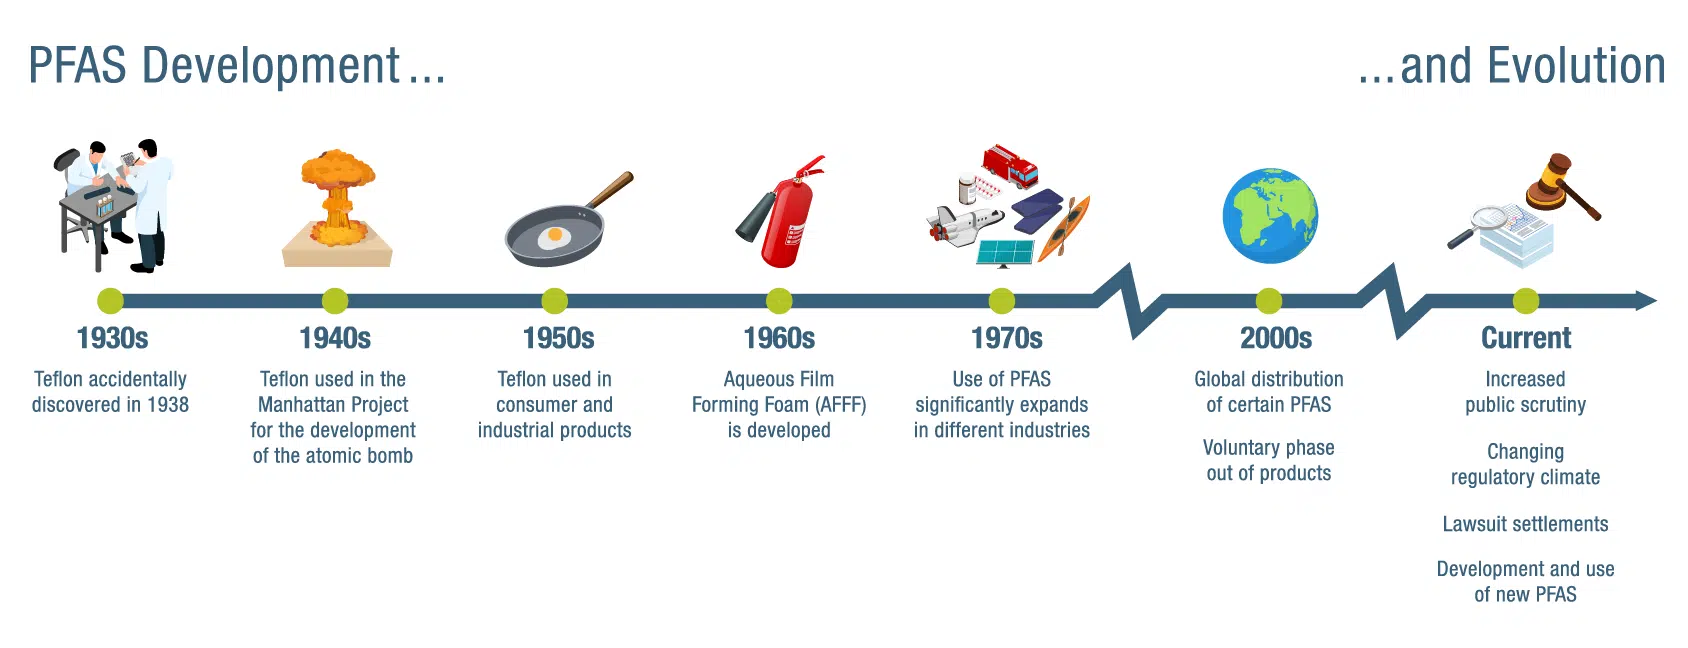 PFAS Evolution from 1930s to 2020